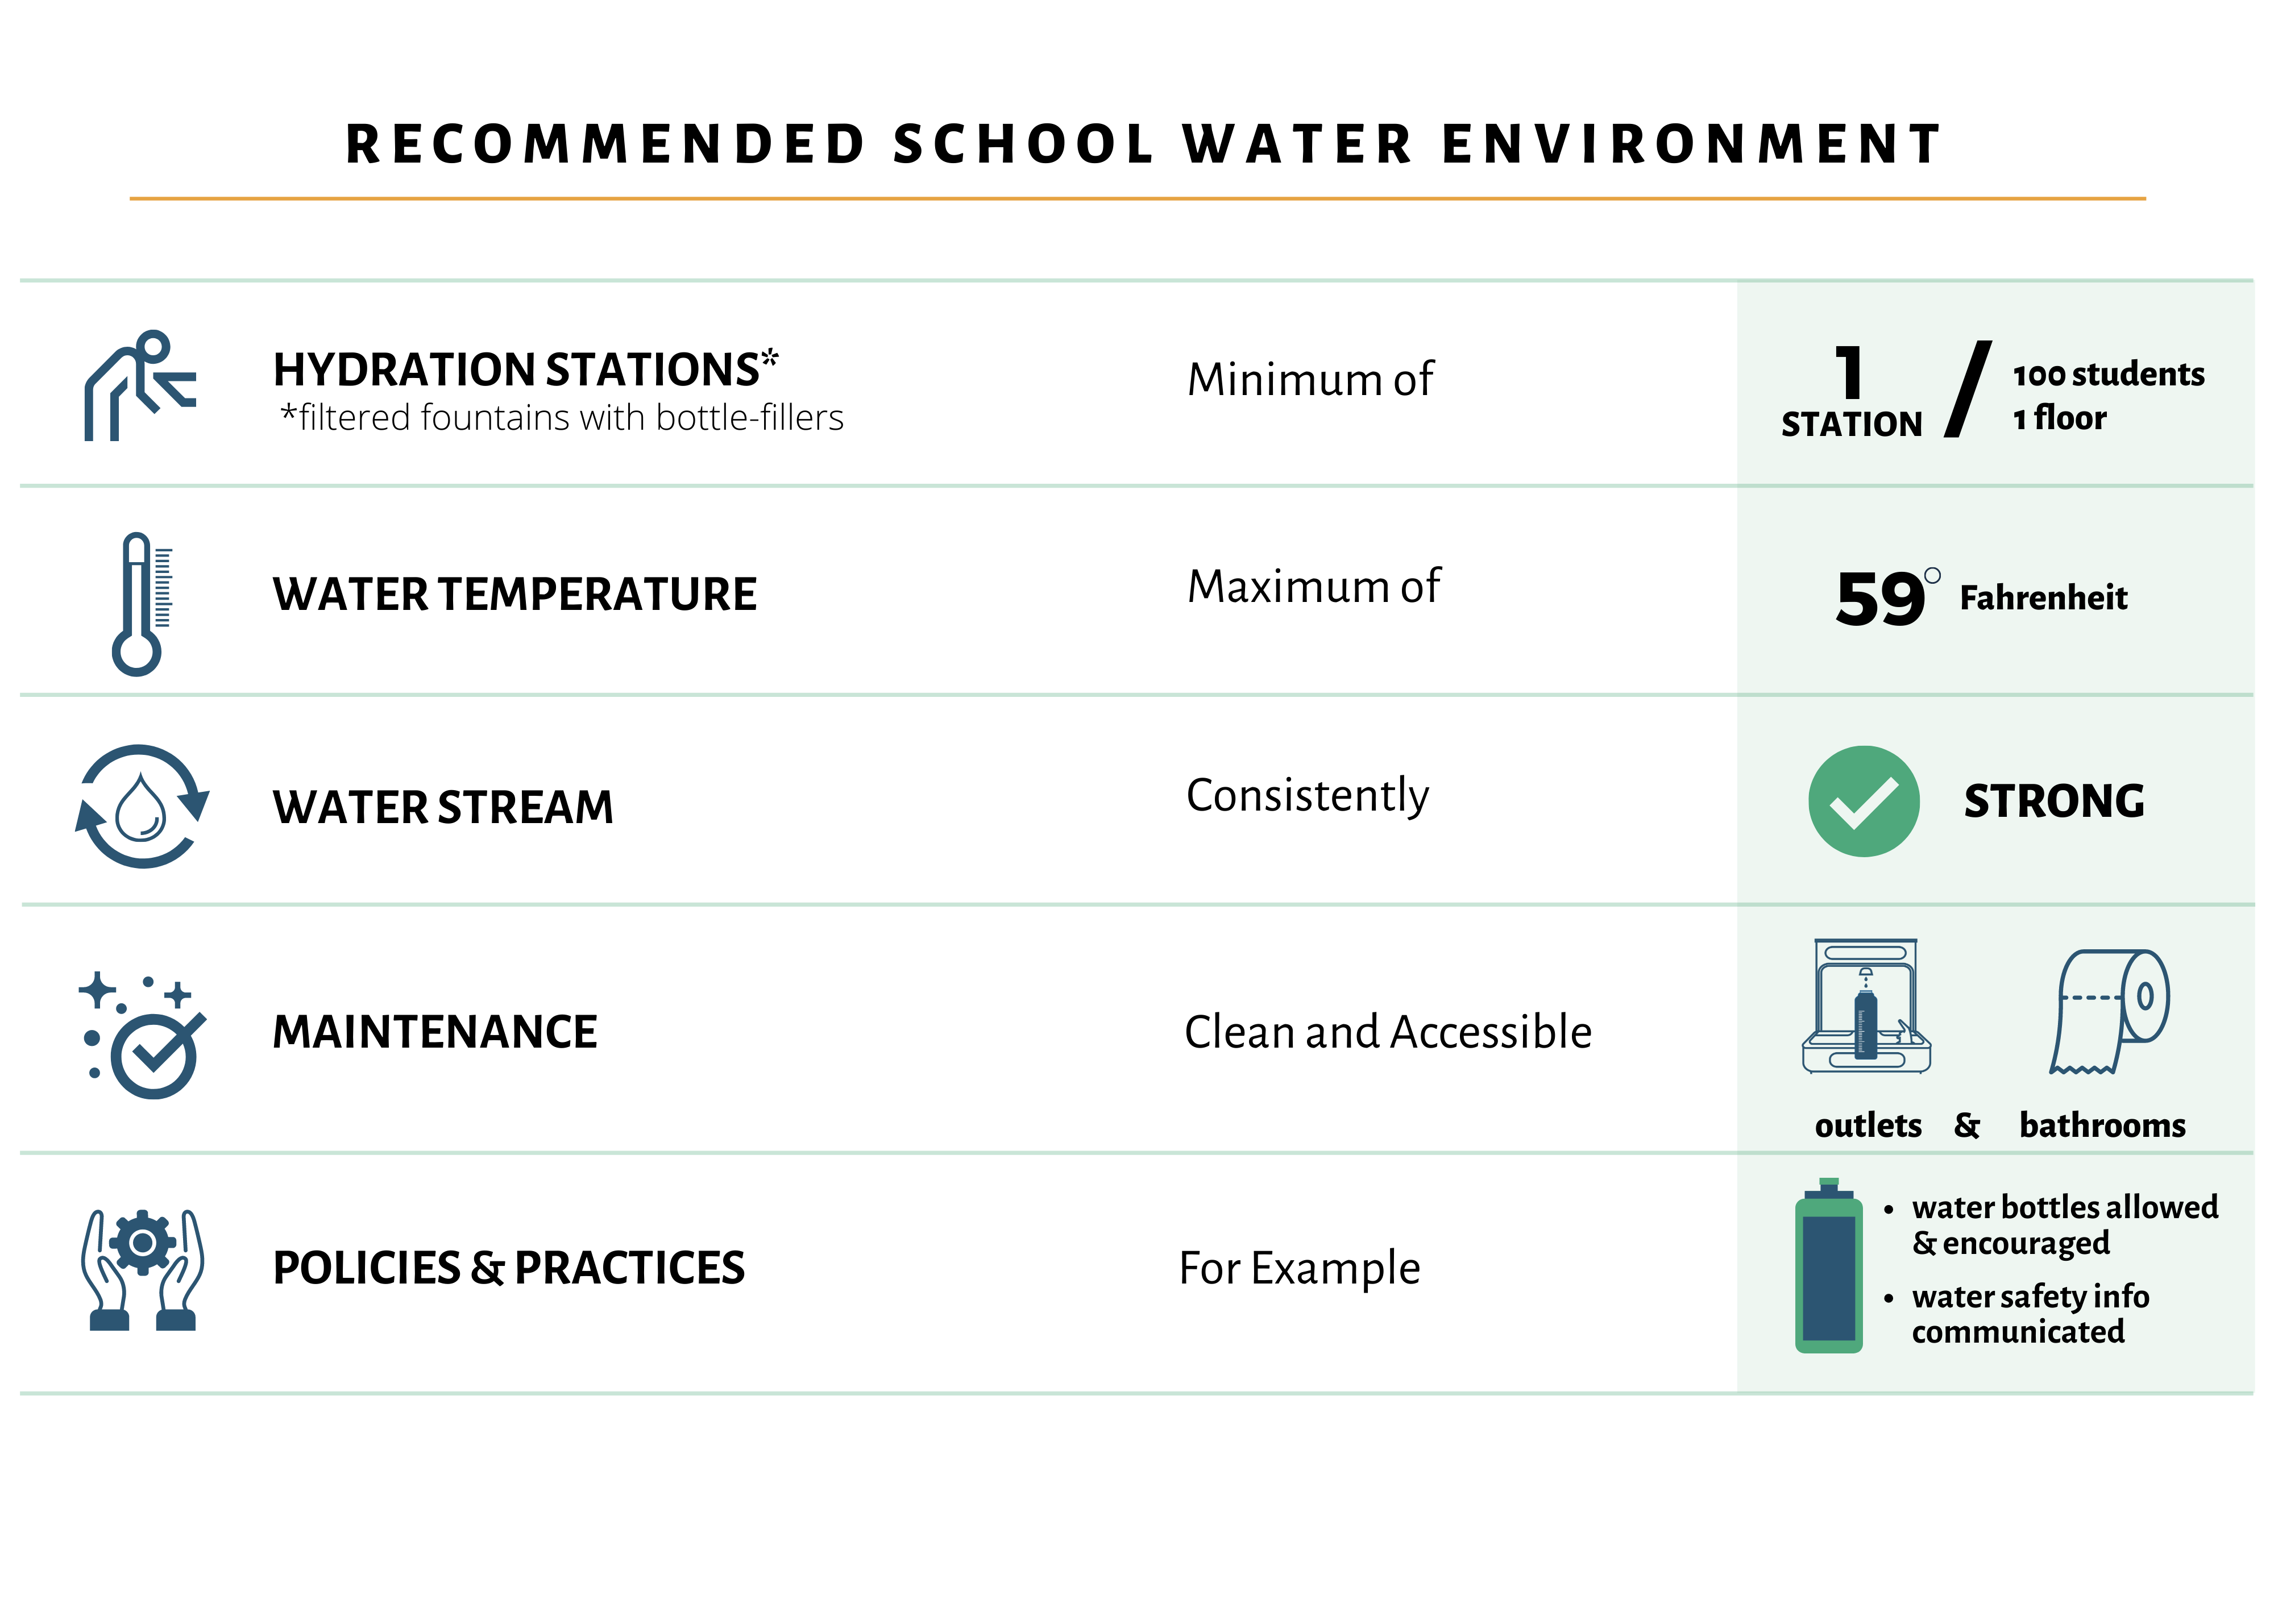 This table shows the recommendations for school water environments: There should be a minimum of 1 hydration station per 100 students on one floor, water temperature should be a maximum of 59 degrees Fahrenheit, water stream should be consistently strong, maintenance should be clean and accessible in outlets and bathrooms, policies and practices should be in place - for example - water bottles allowed and encouraged and water safety information is communicated